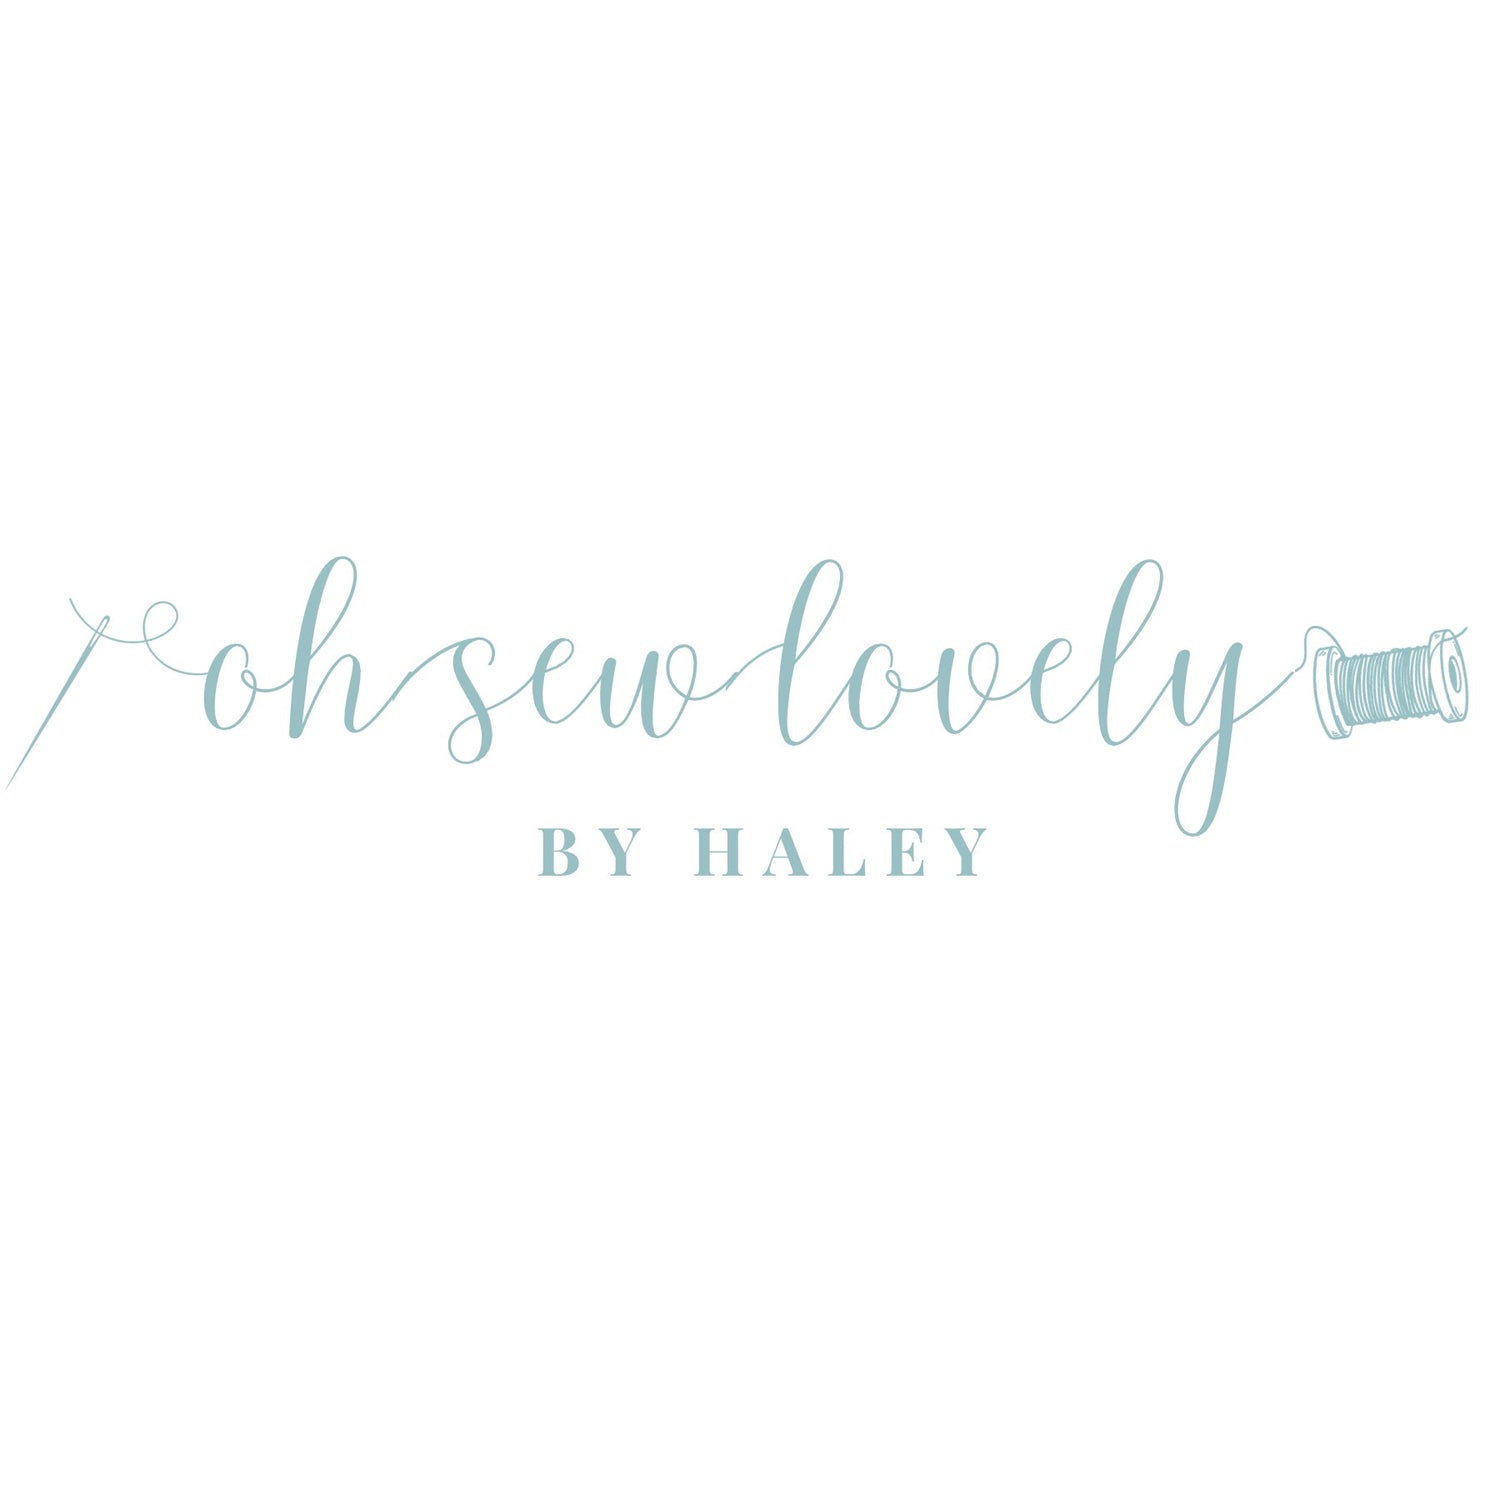 Oh Sew Lovely by Haley